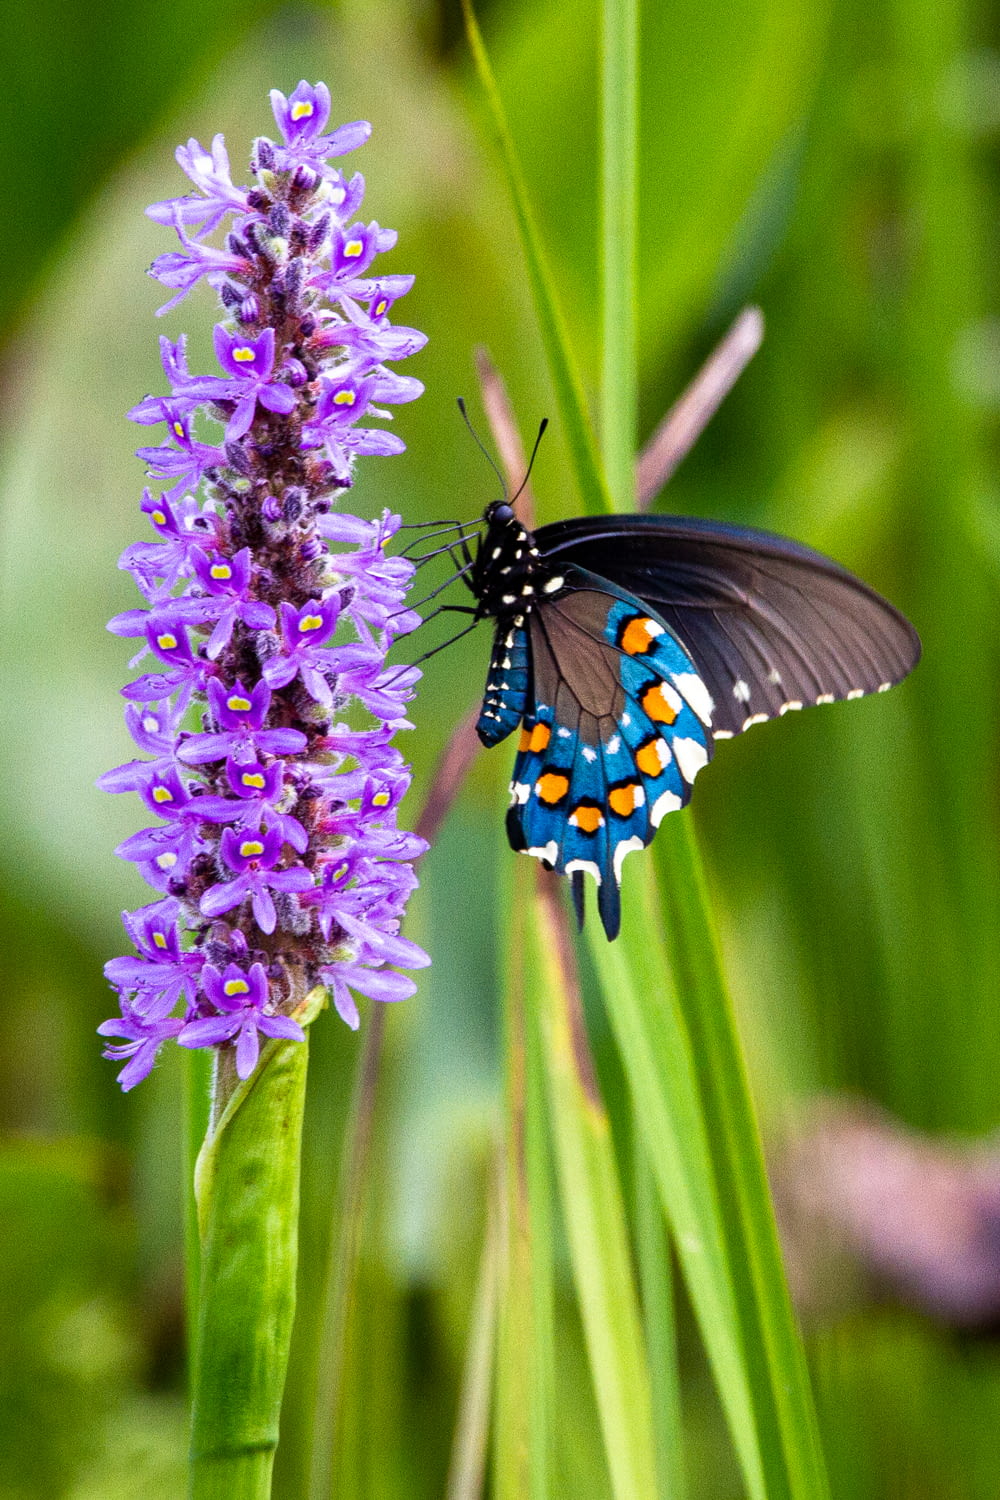 black blue and white butterfly perched on purple flower in close up photography during daytime